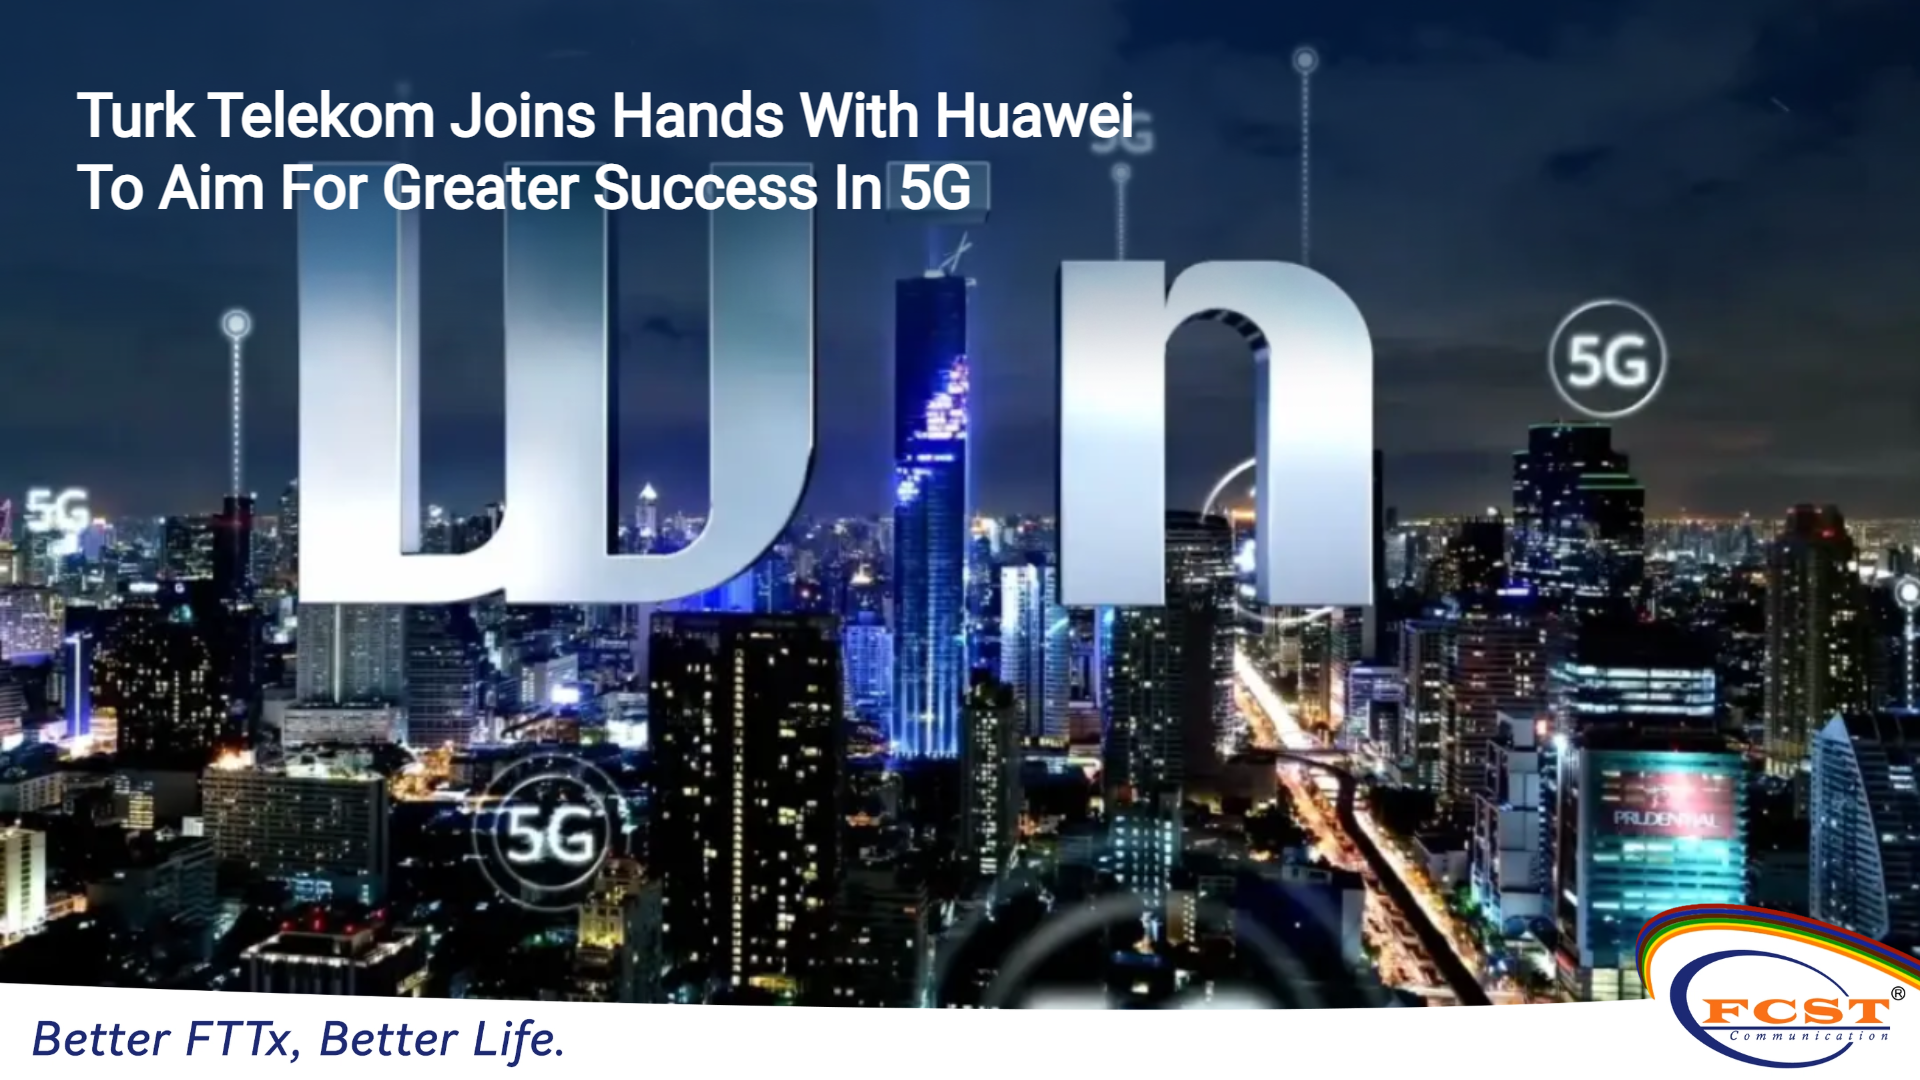 Turk Telekom Joins Hands With Huawei To Aim For Greater Success In 5G/5G-A